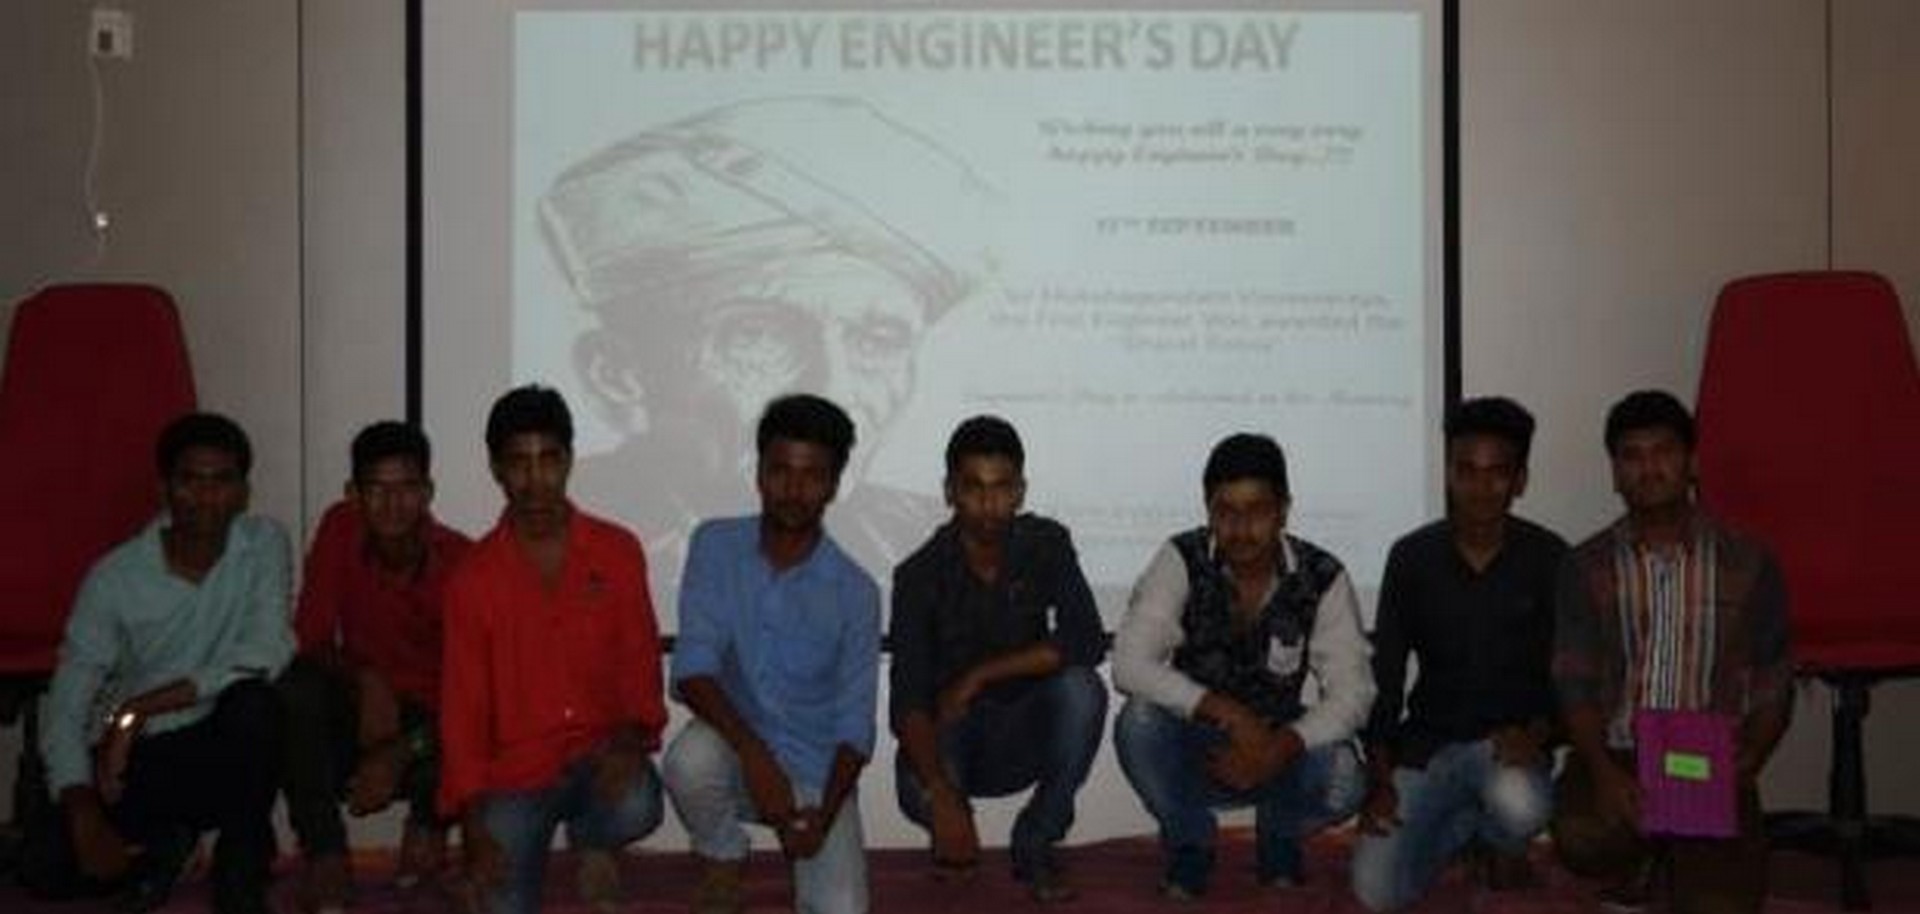 Engineers Day Events images 